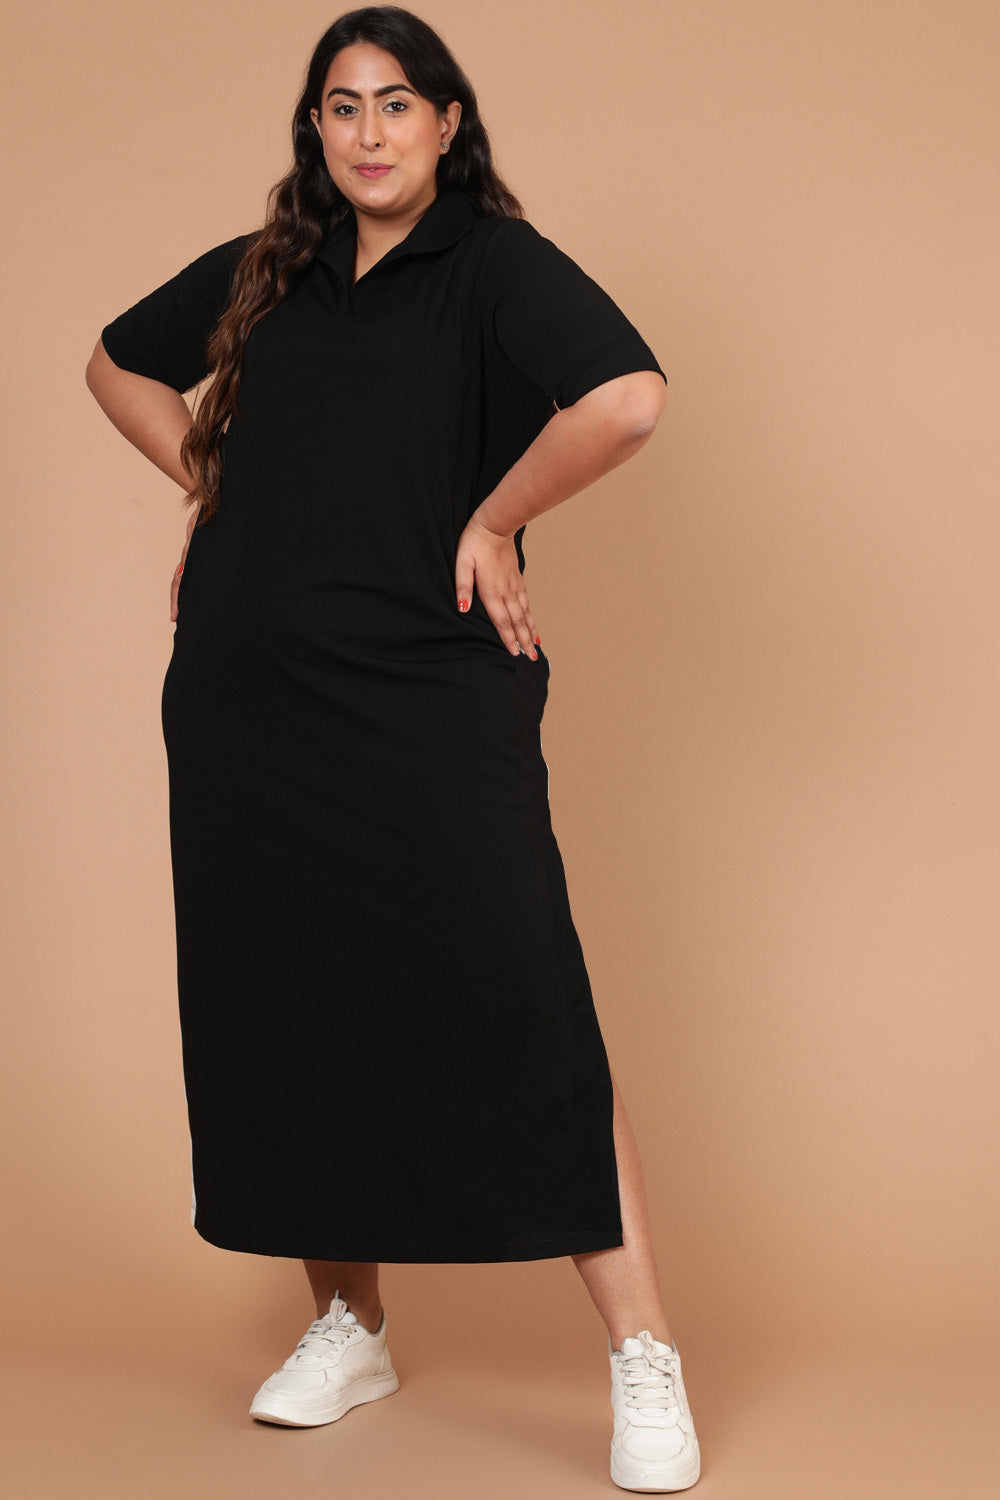 Shop Petite Plus Size Dresses From These Brands - Natalie in the City